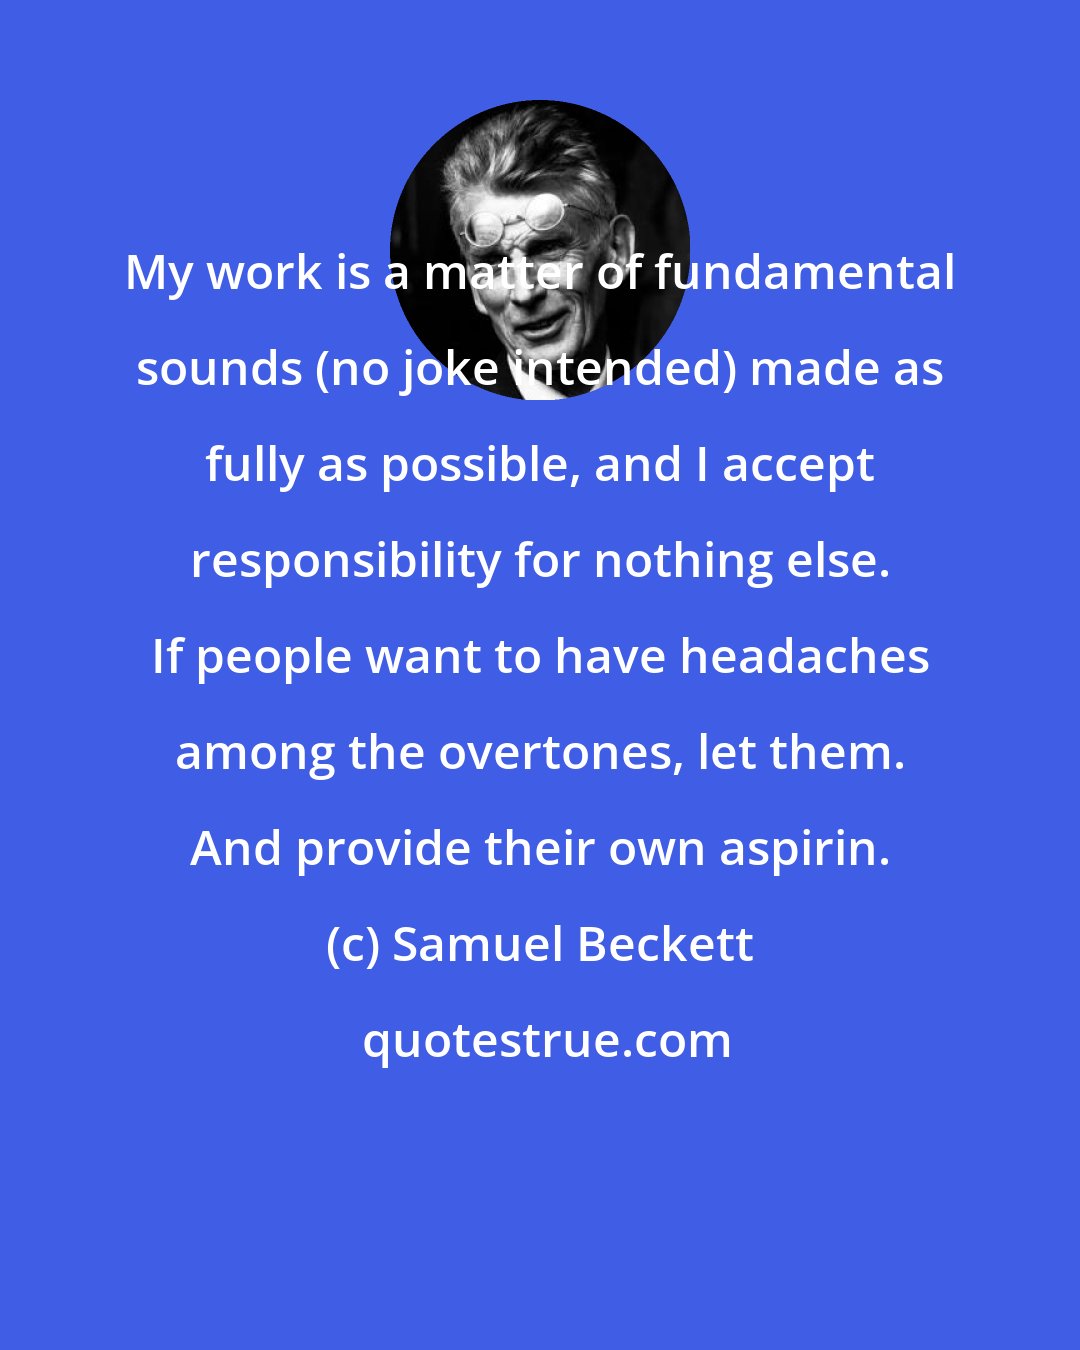 Samuel Beckett: My work is a matter of fundamental sounds (no joke intended) made as fully as possible, and I accept responsibility for nothing else. If people want to have headaches among the overtones, let them. And provide their own aspirin.